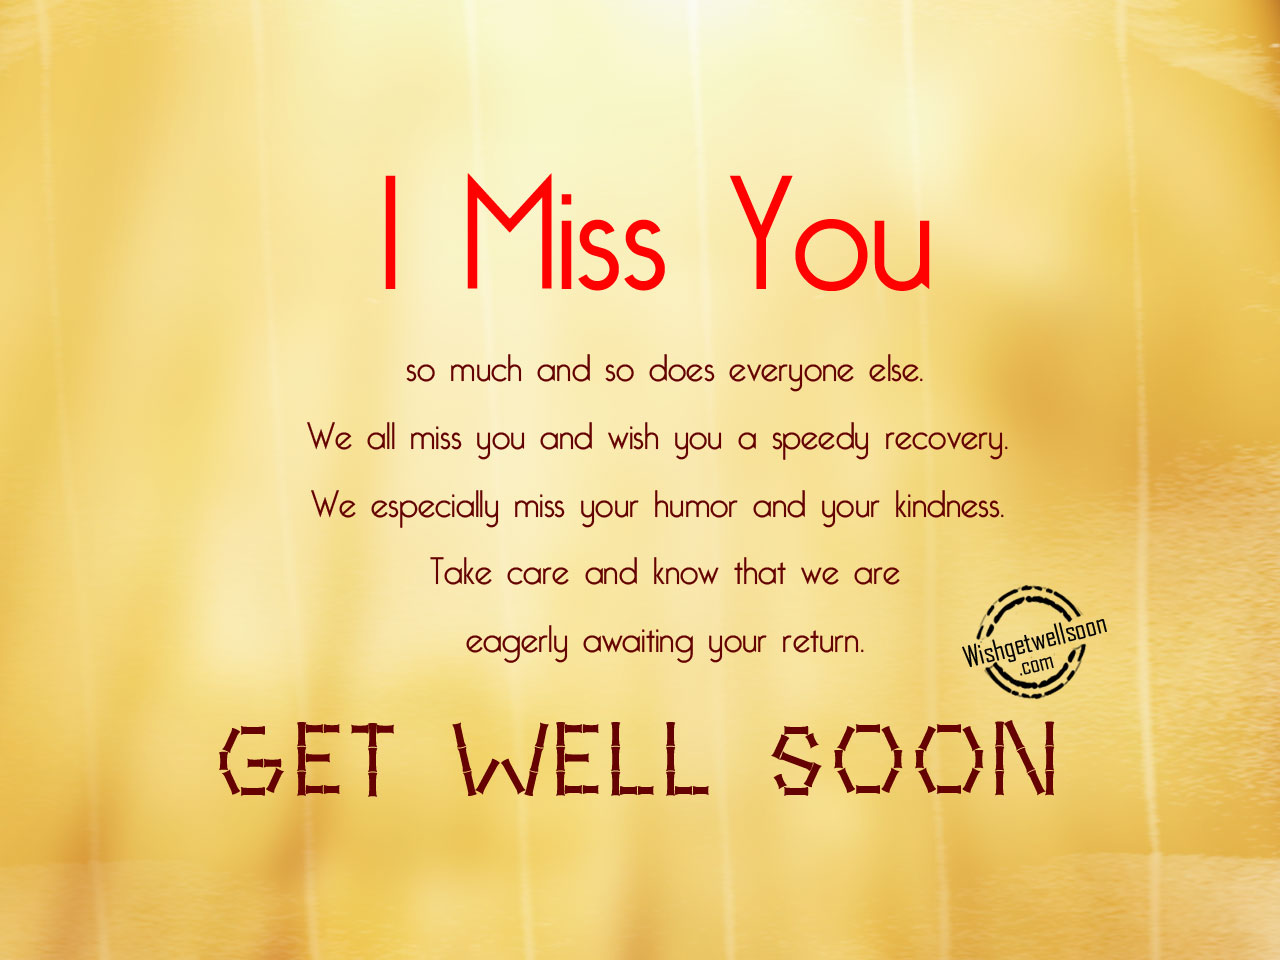 Get Well Soon Wishes Pictures, Images - Page 3